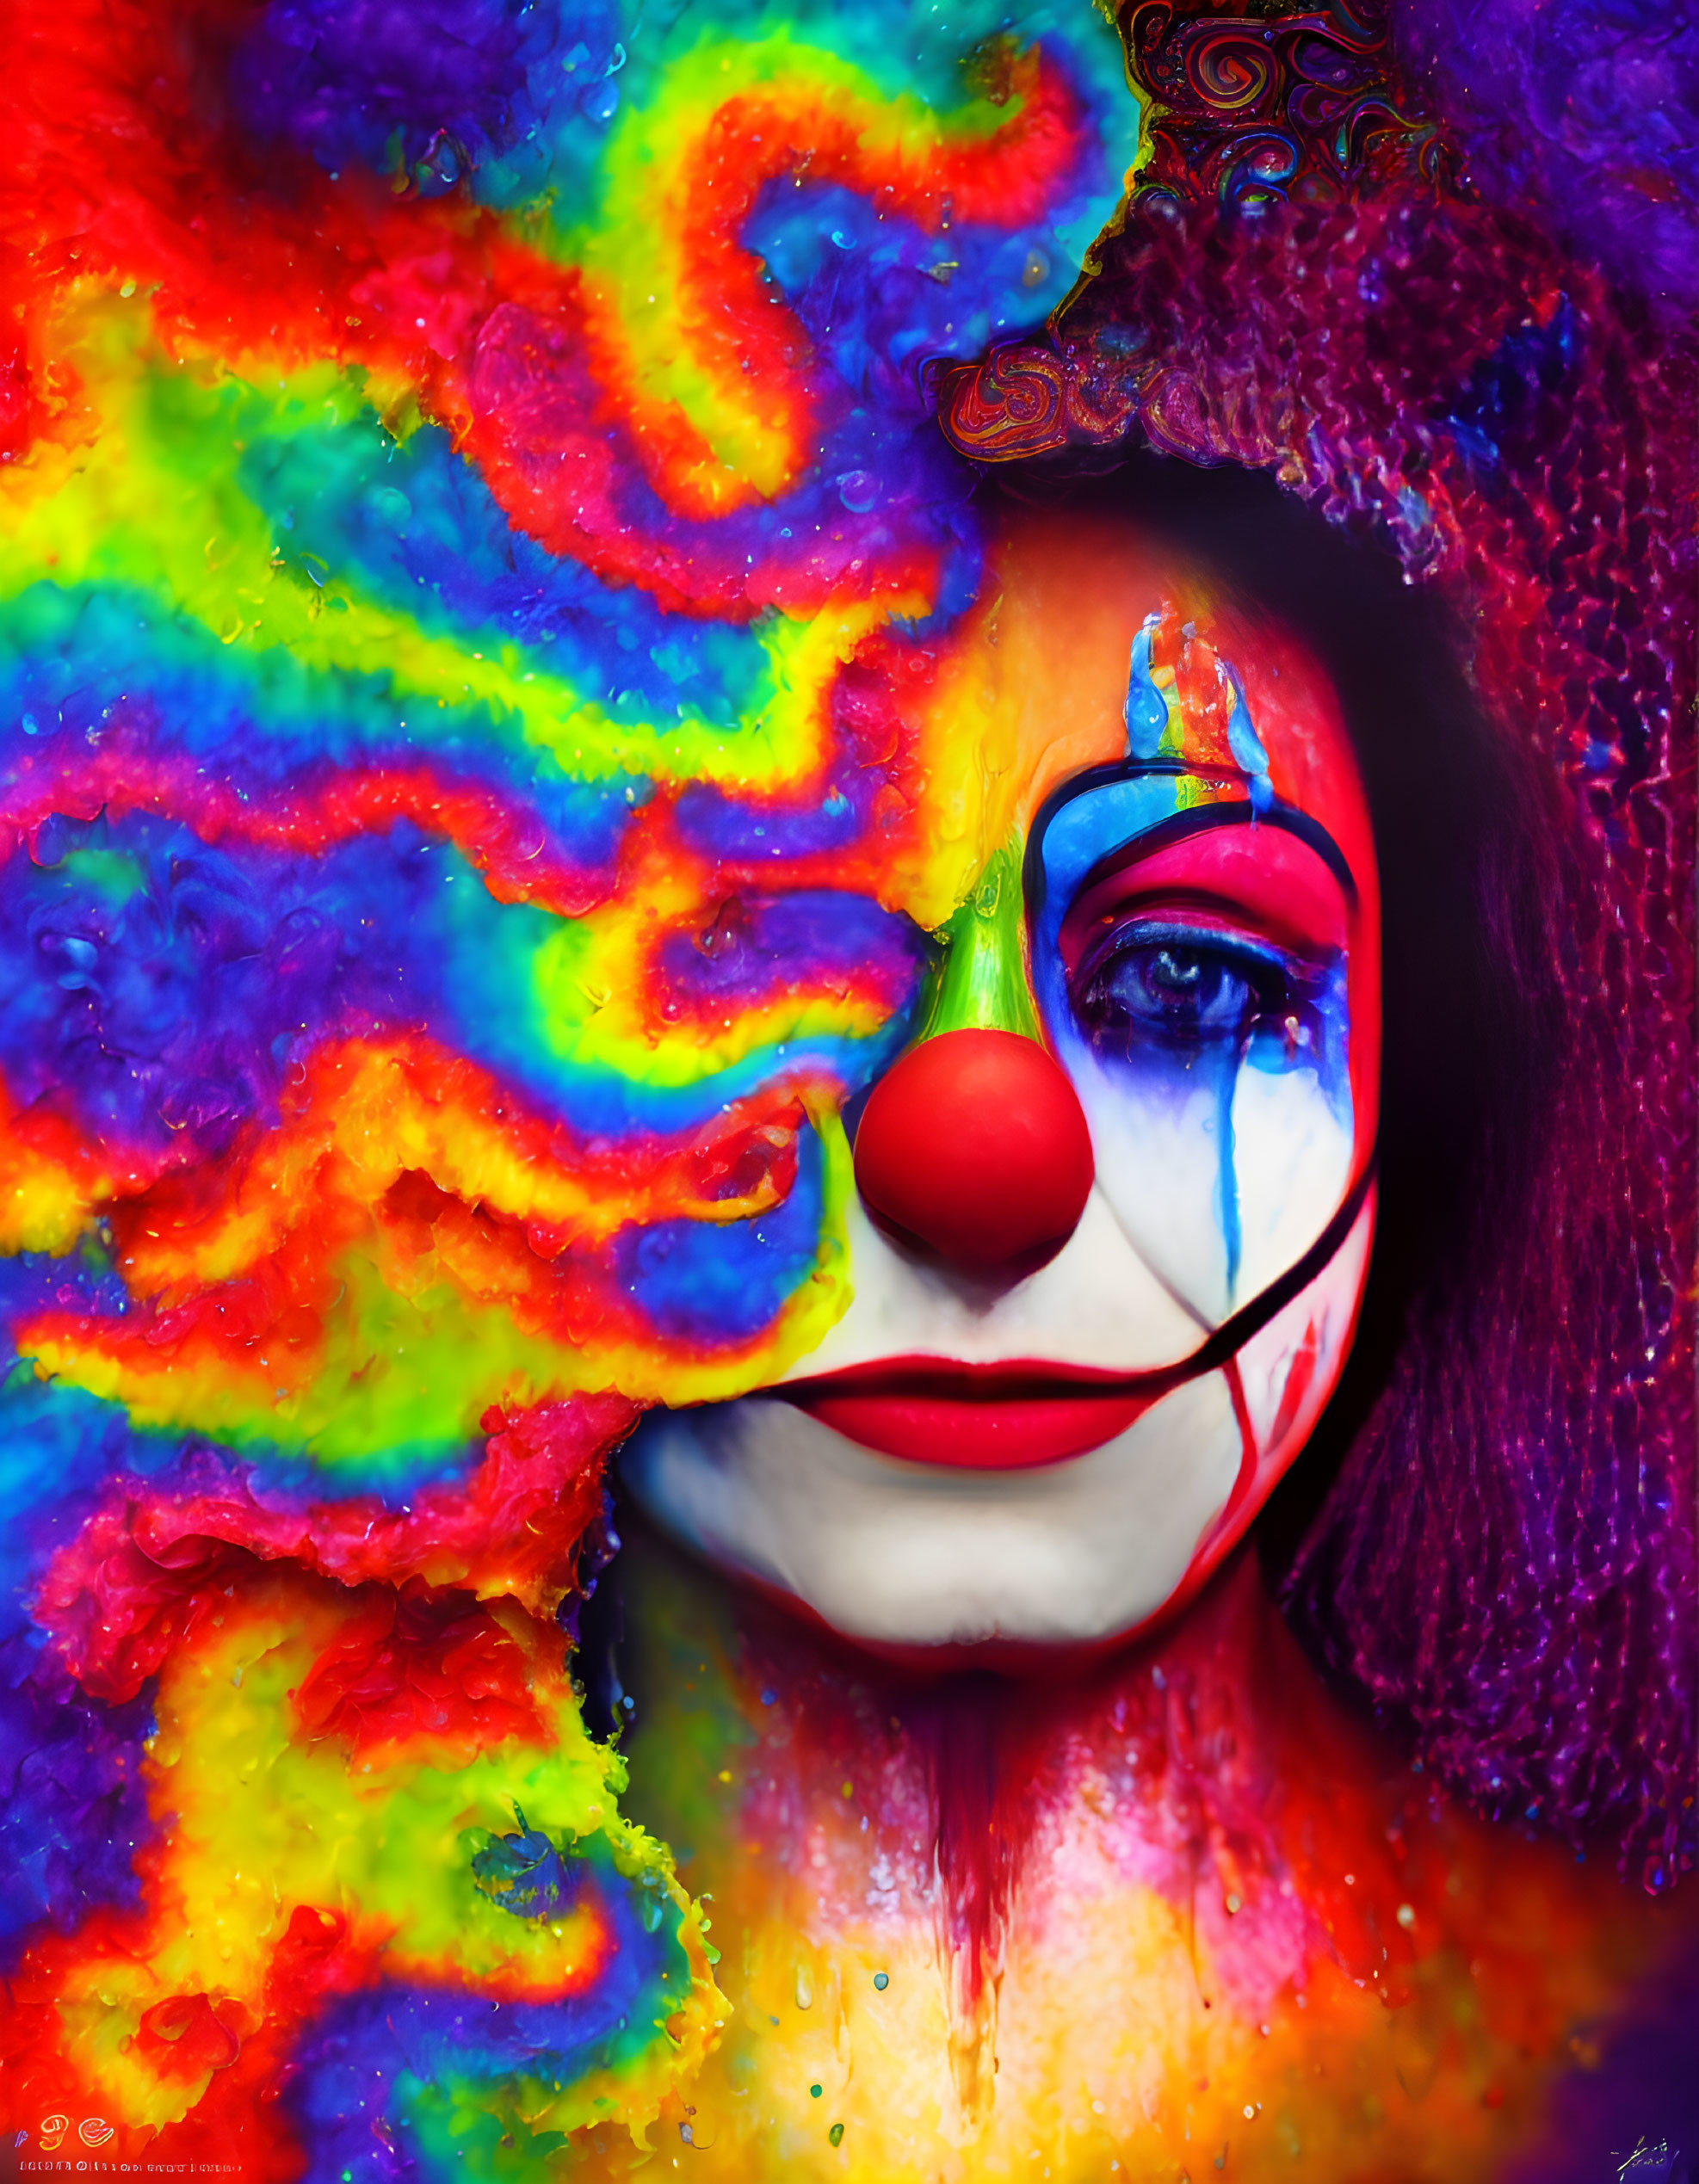 Colorful Clown Makeup with Tear and Sad Expression under Textured Hat